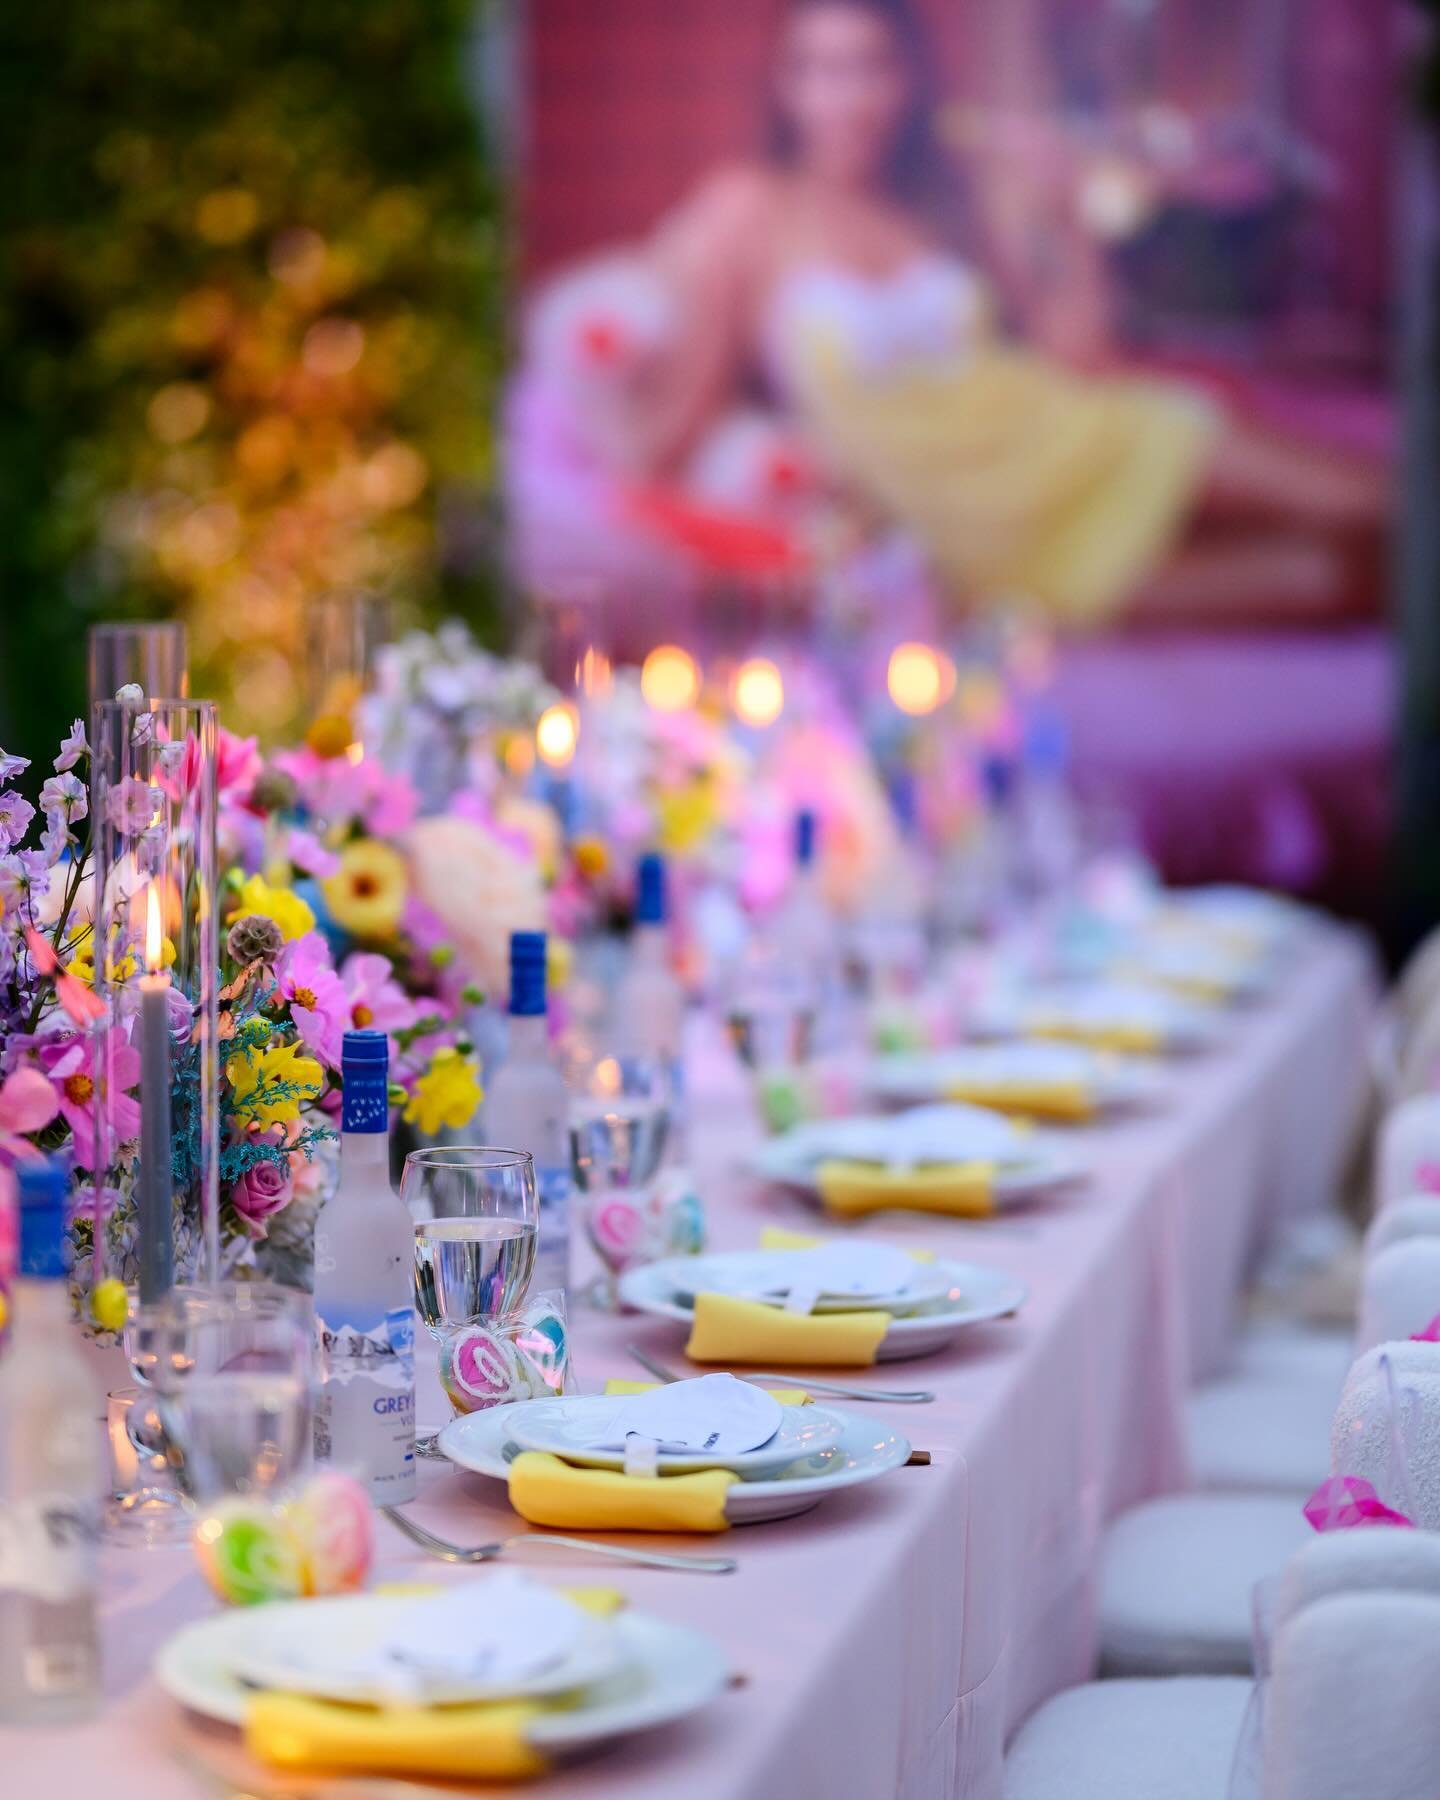 @seeyoutomorrow by @madeleinecwhite - what a colorful way to celebrate!

Image: @edlt.photo 

#thewotp #wifeoftheparty #seeyoutomorrow #pajamaparty #dinnerparty #florals #greygoose